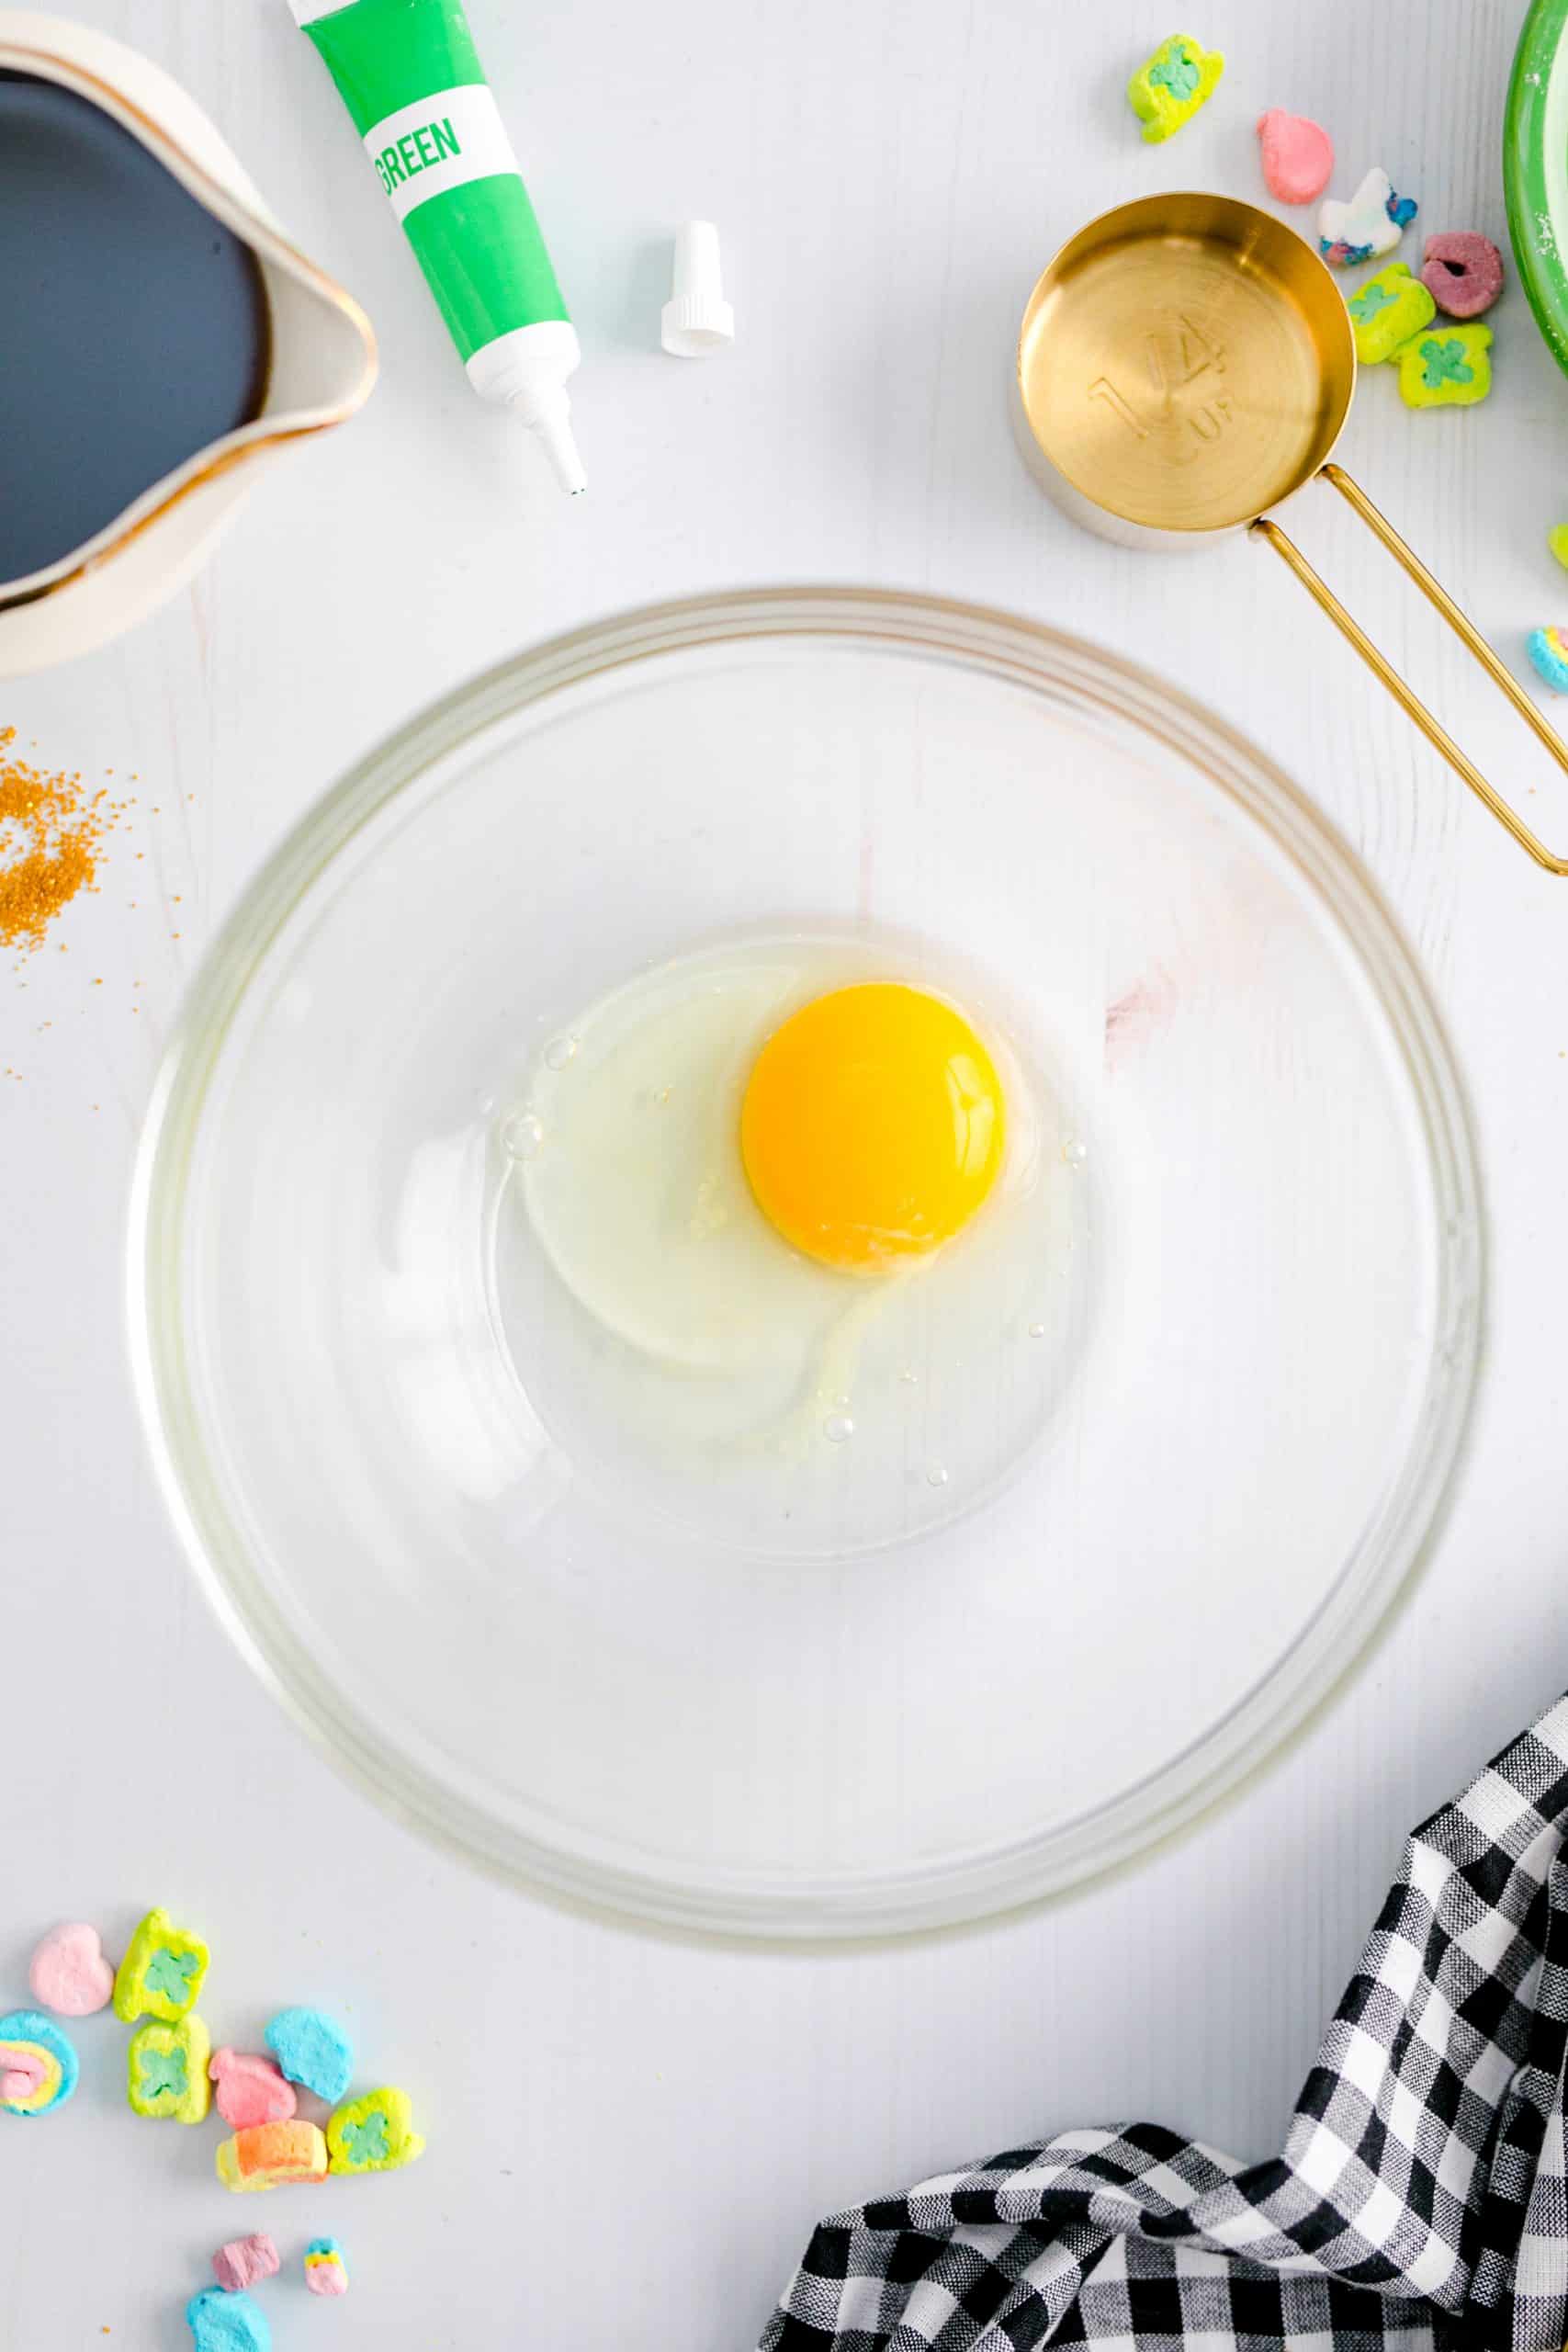 Egg in a clear bowl.